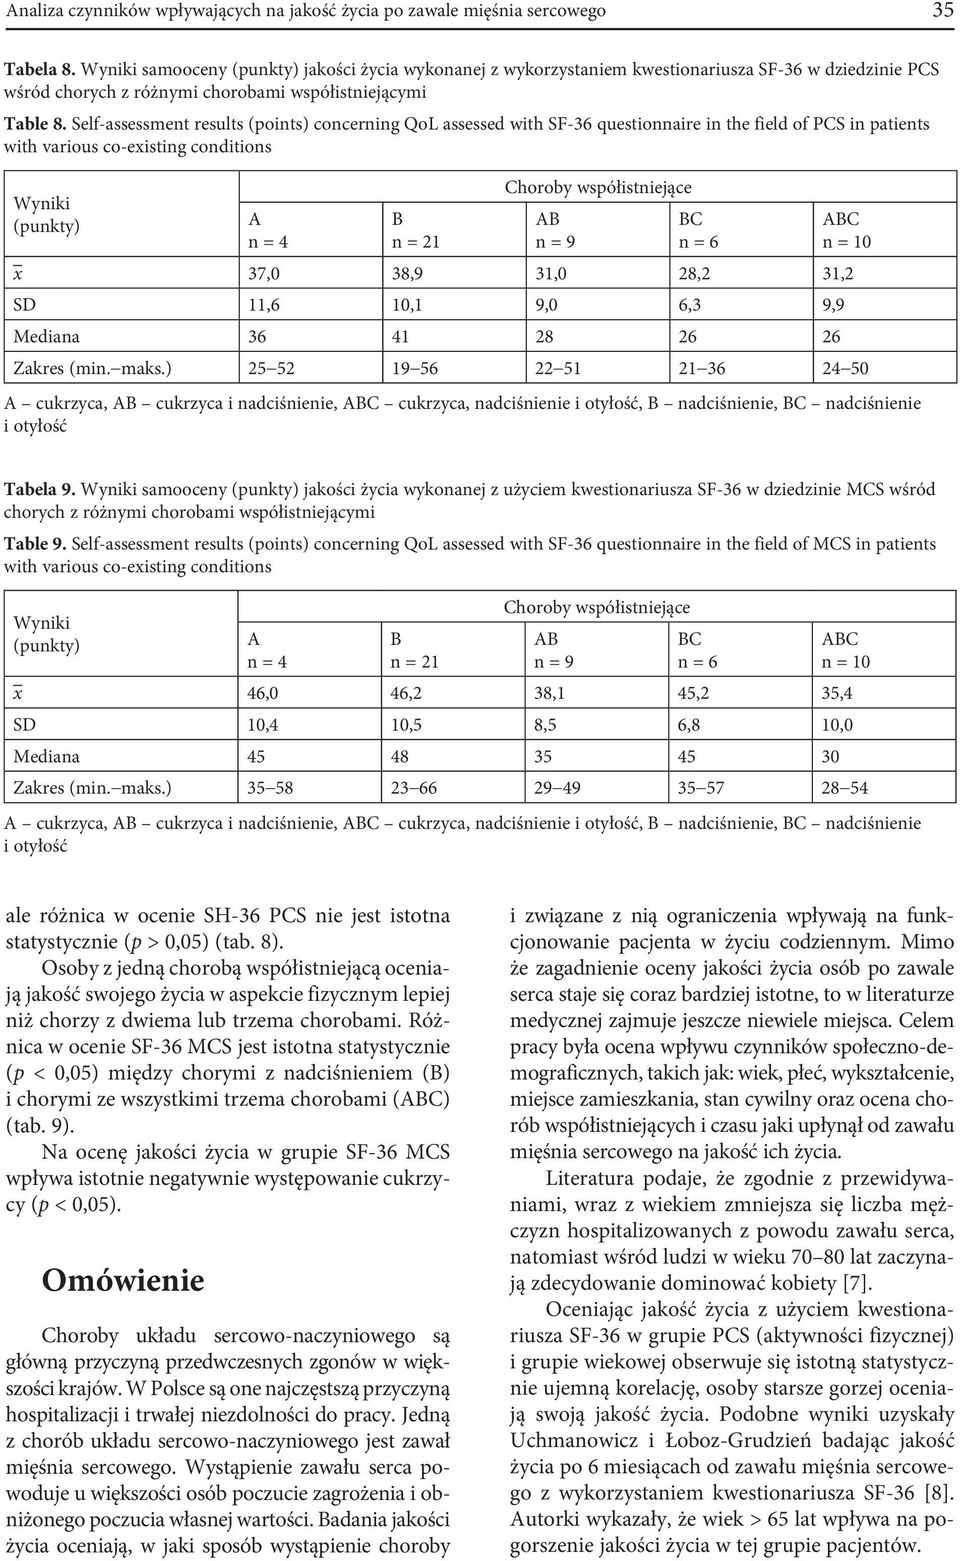 Self-assessment results (points) concerning QoL assessed with SF-36 questionnaire in the field of PCS in patients with various co-existing conditions Wyniki (punkty) A n = 4 B n = 1 Choroby